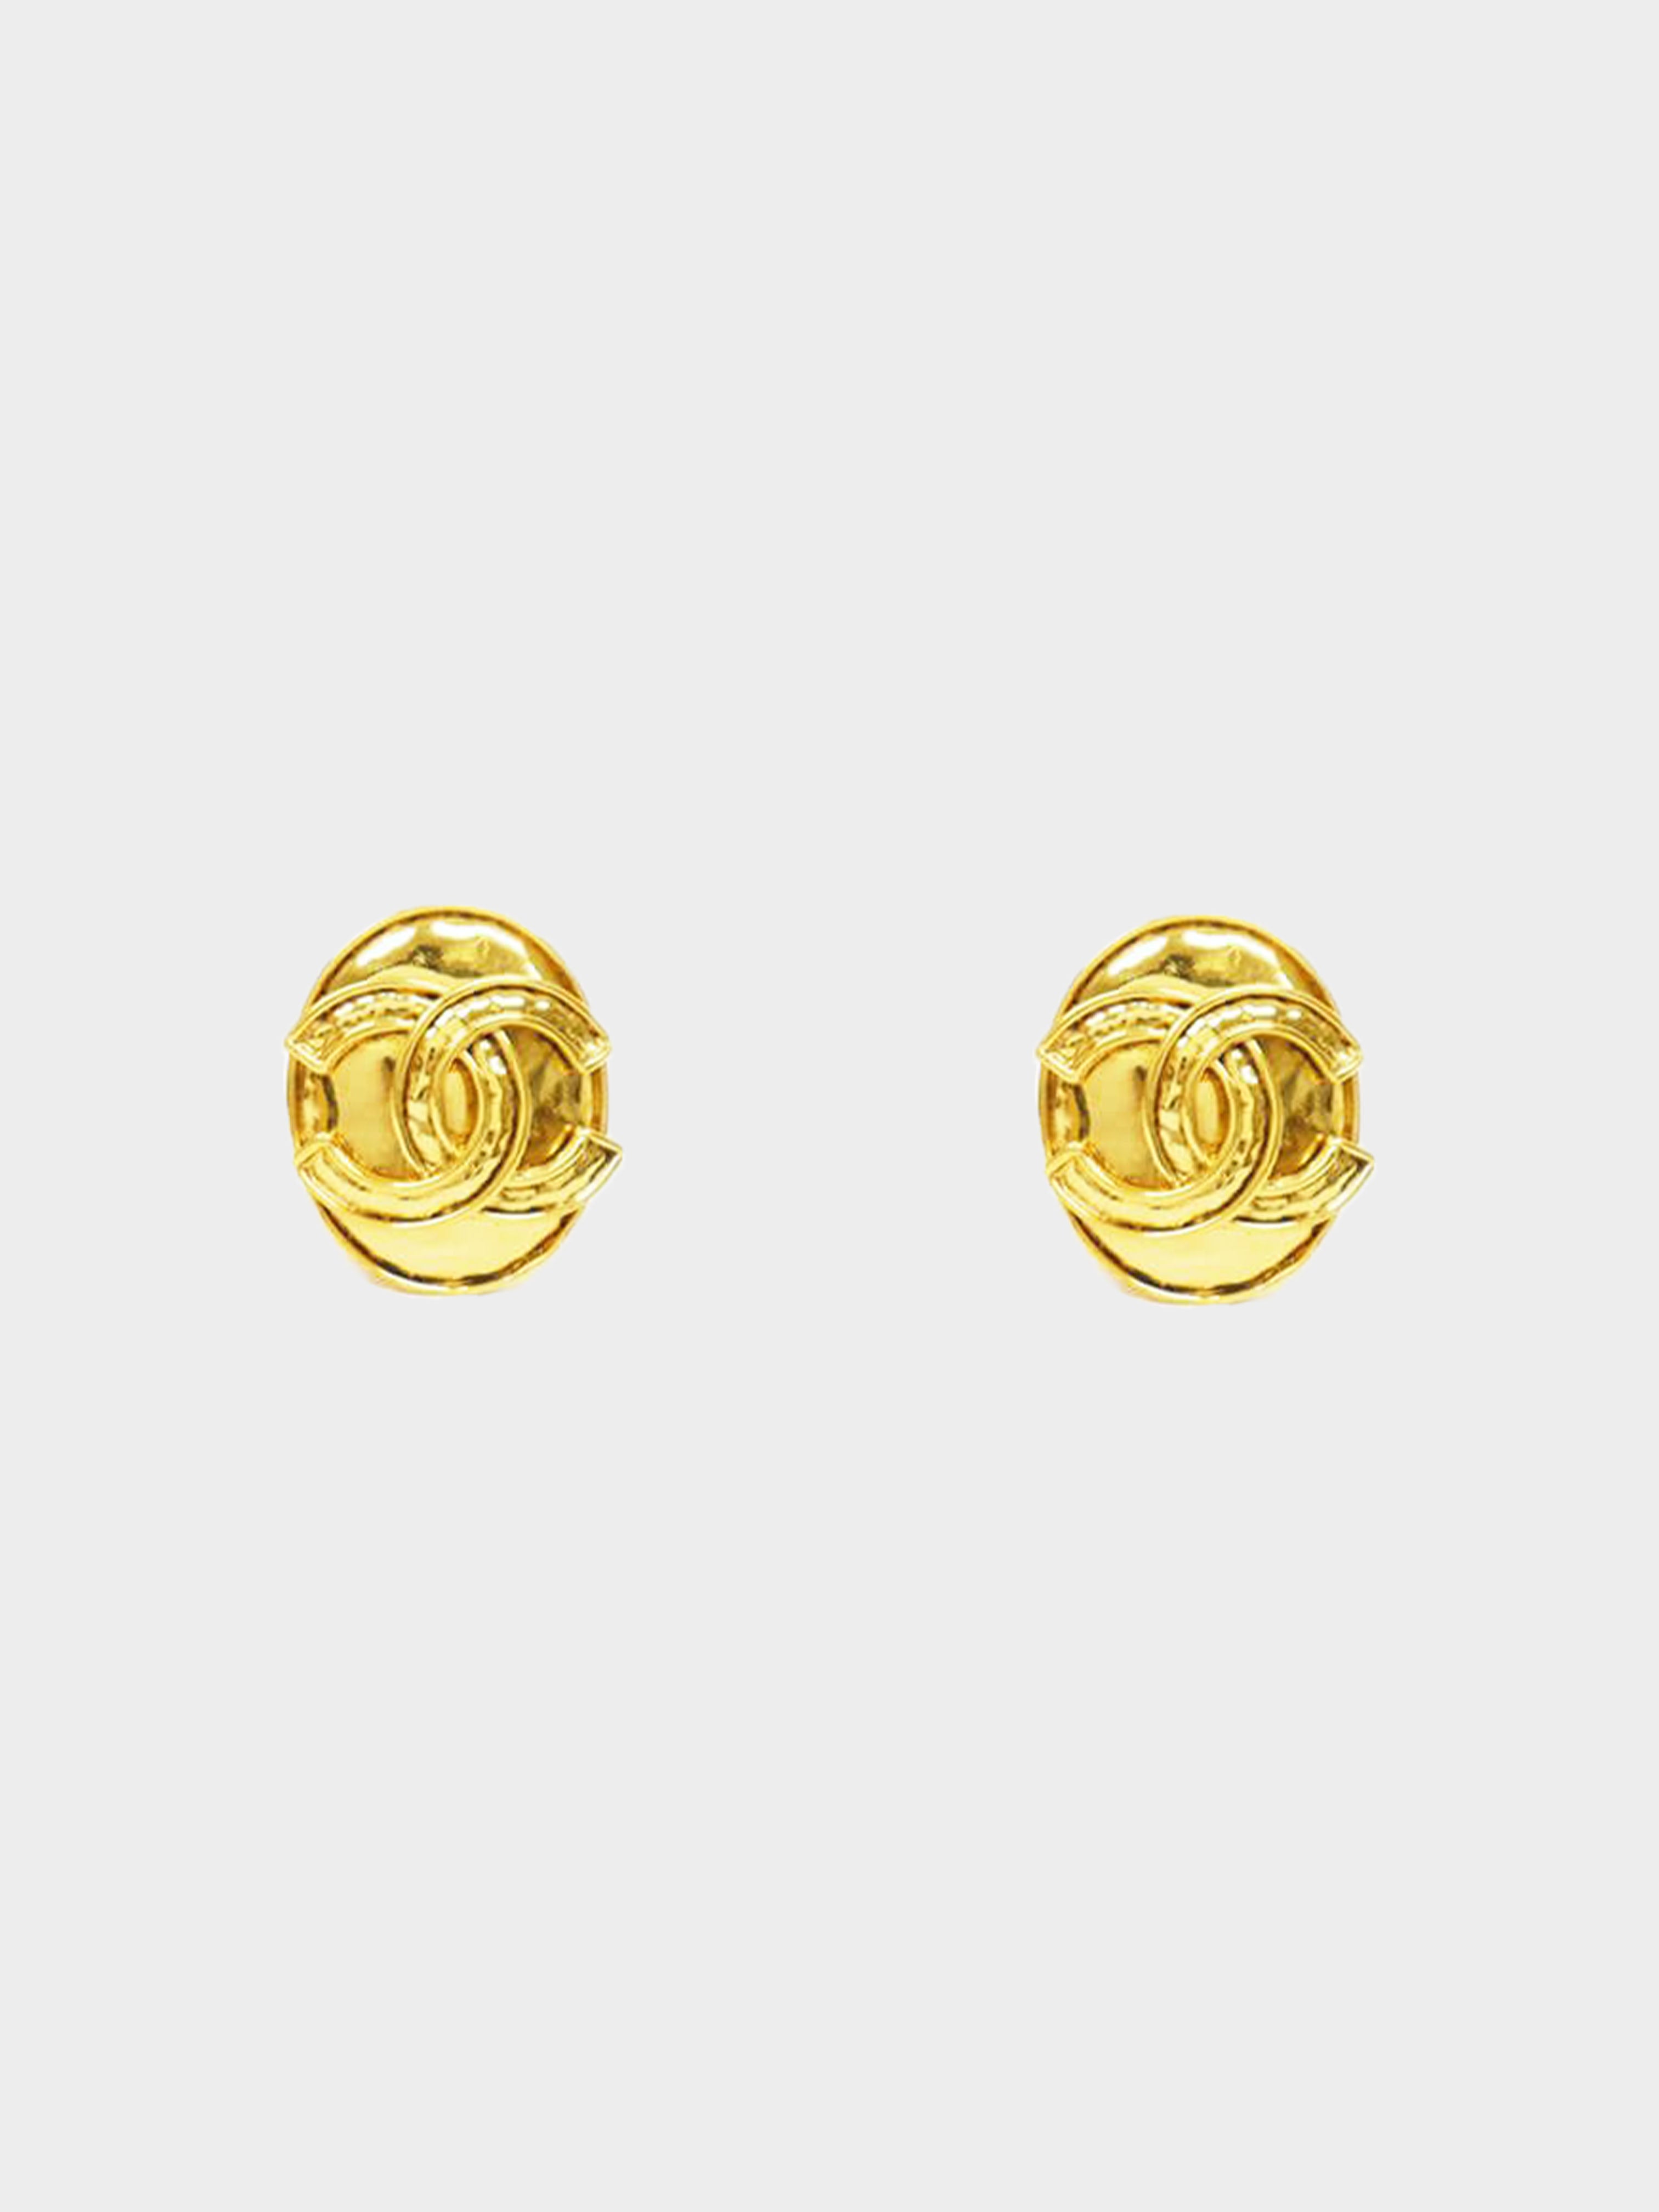 Vintage Chanel Earrings Coco Chanel CC Logo Rope Texture Round